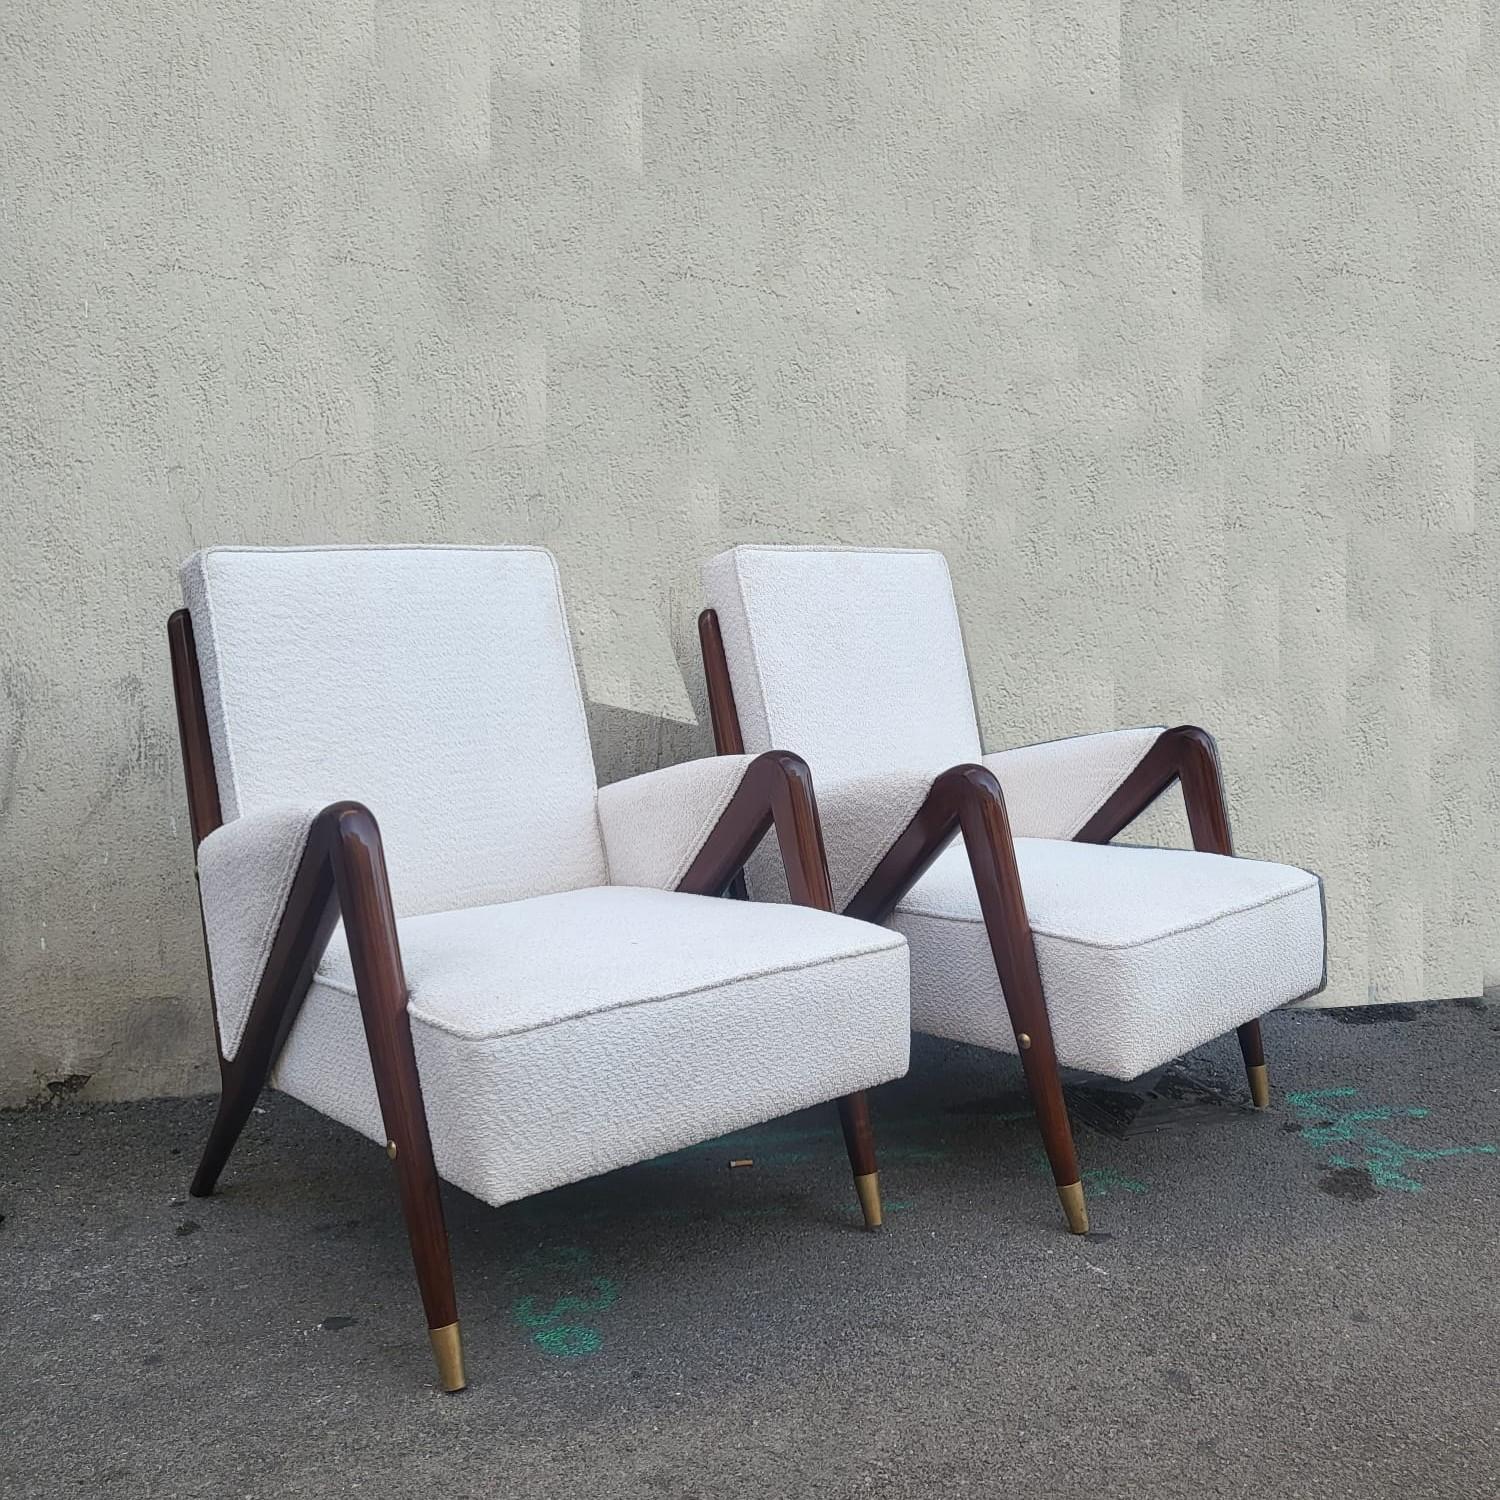 French Pair Of Armchairs, Design From The 1950s/1960s